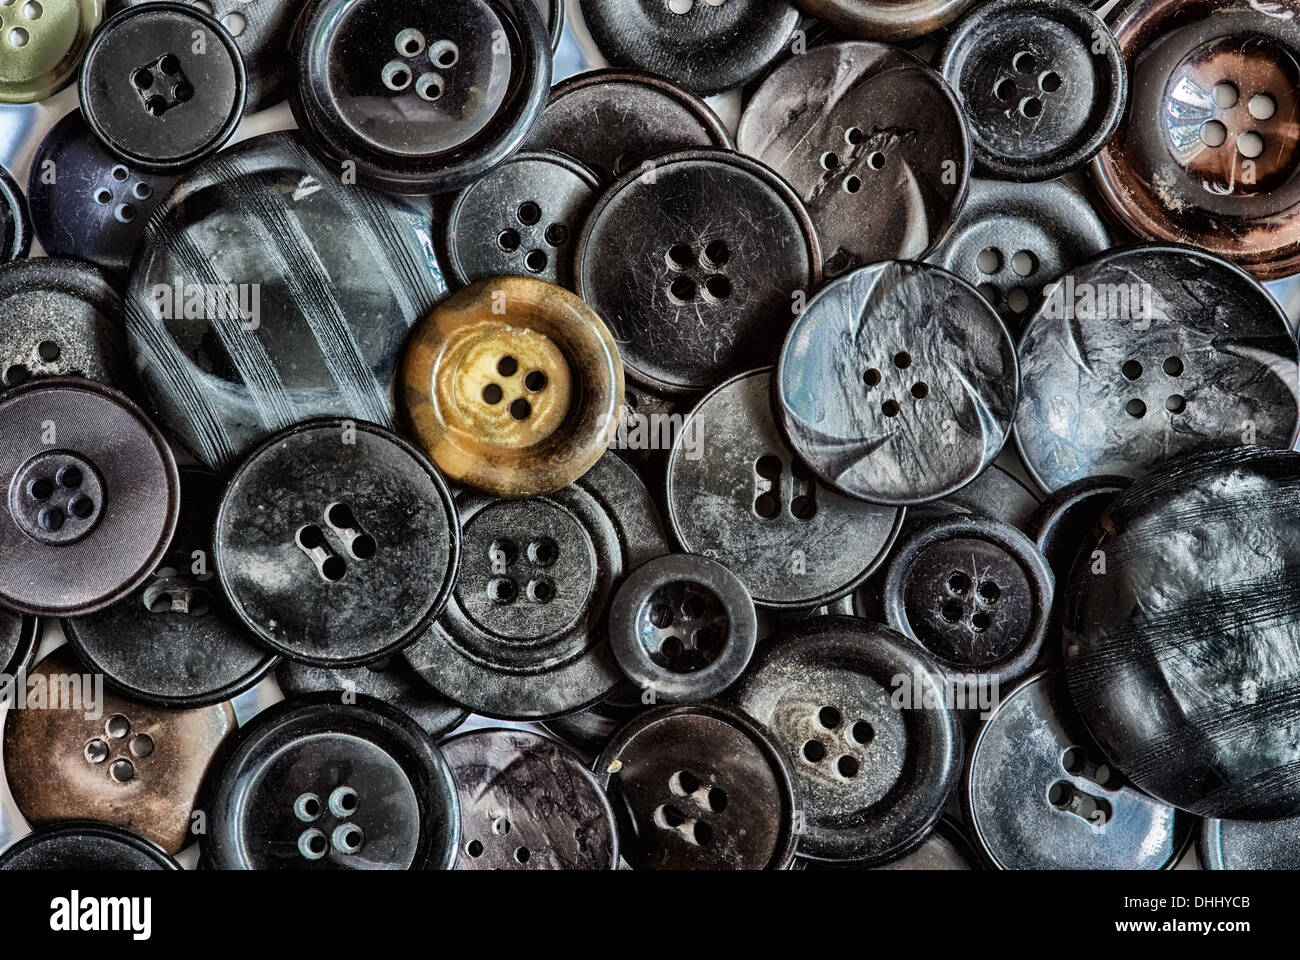 Buttons Stock Photo